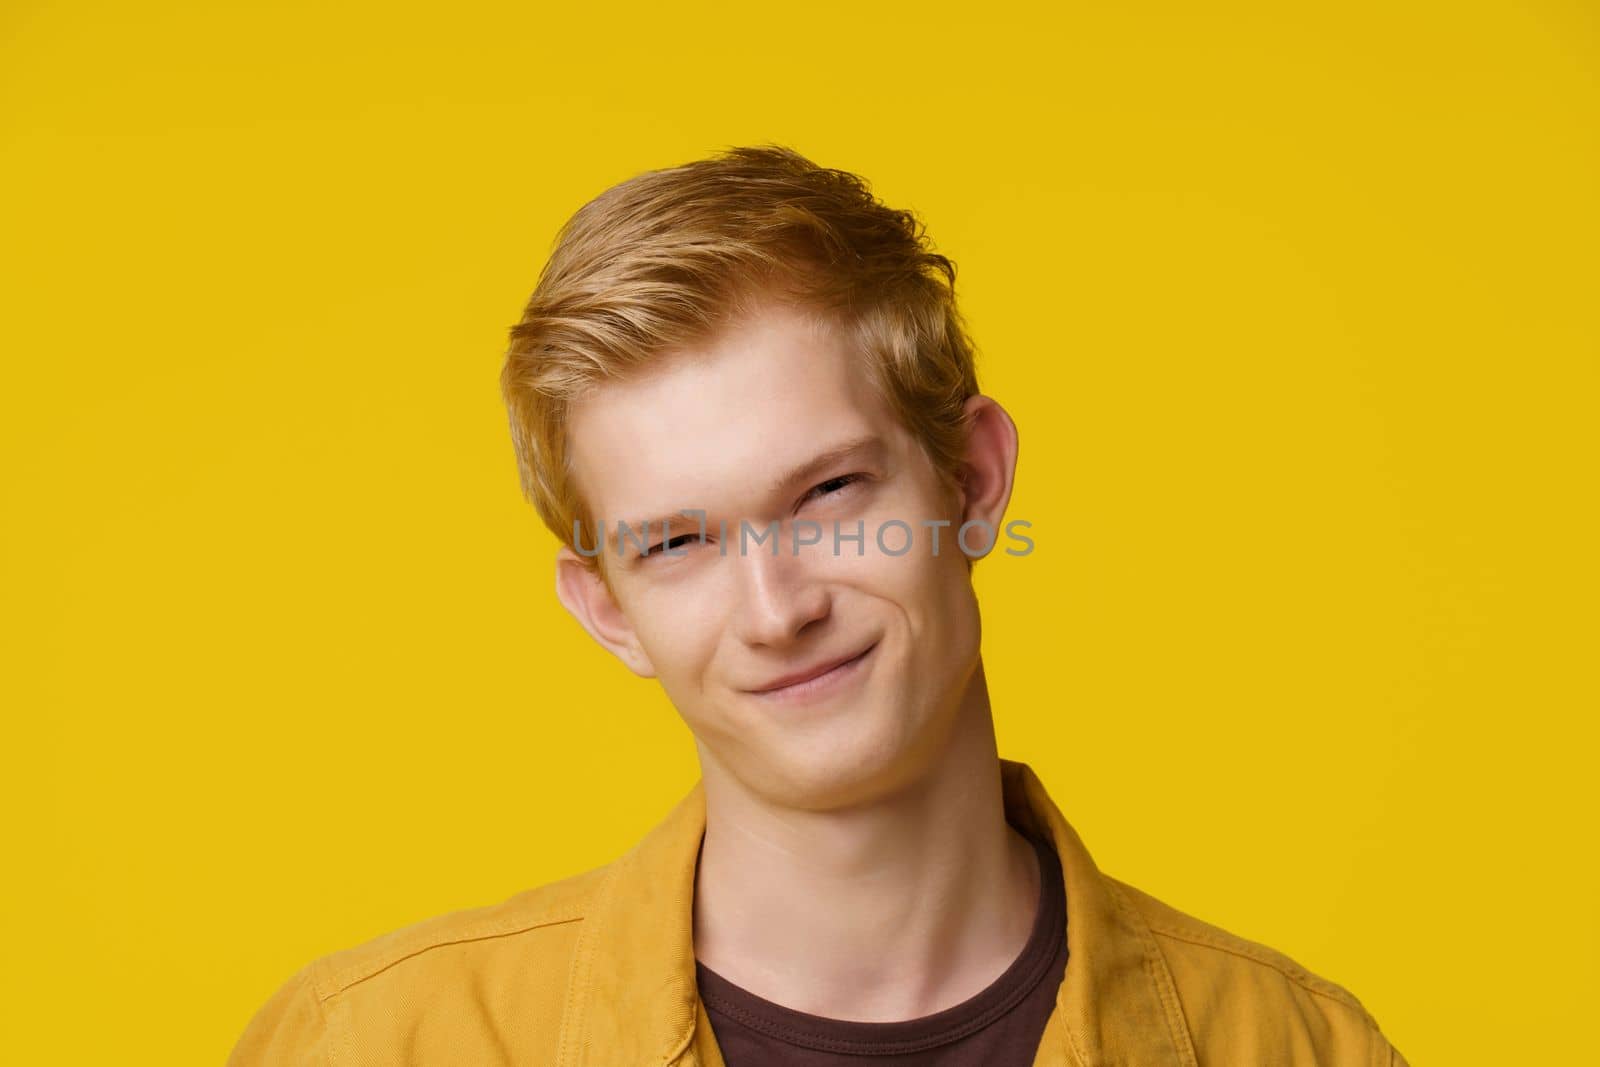 Emotion of Cunning and Deception Concept. A European Young Man shows an Emotion of Cunning and Distrust on a Yellow Background. by LipikStockMedia